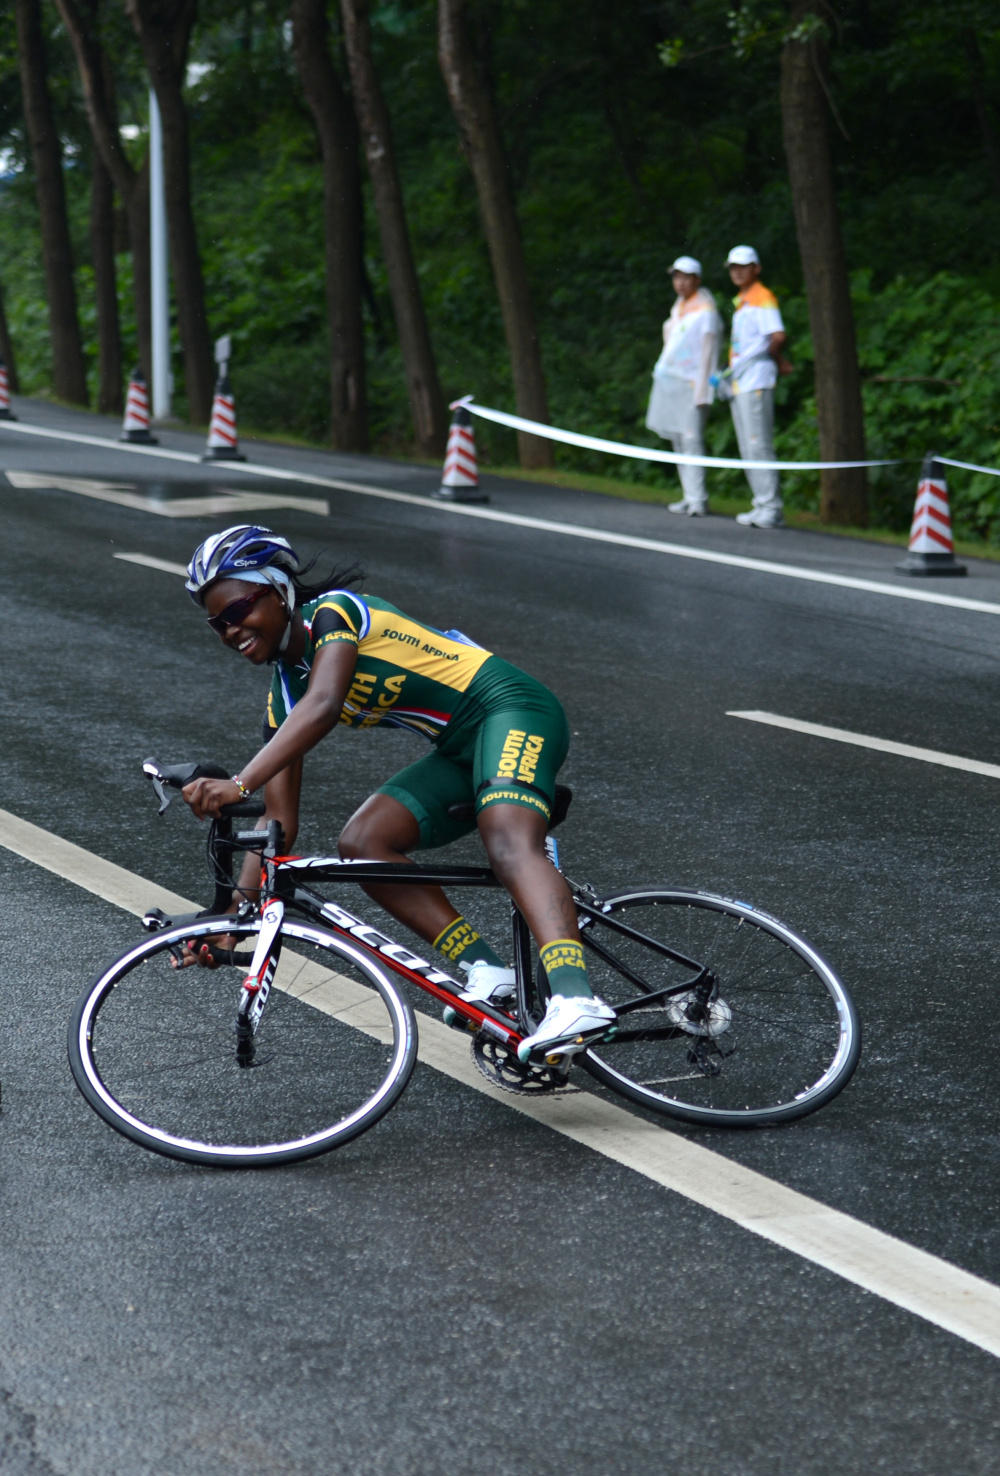 Relebohile Annastacia Pebane of South Africa lost control of her bike during the women's road cycling team event ©Nanjing 2014